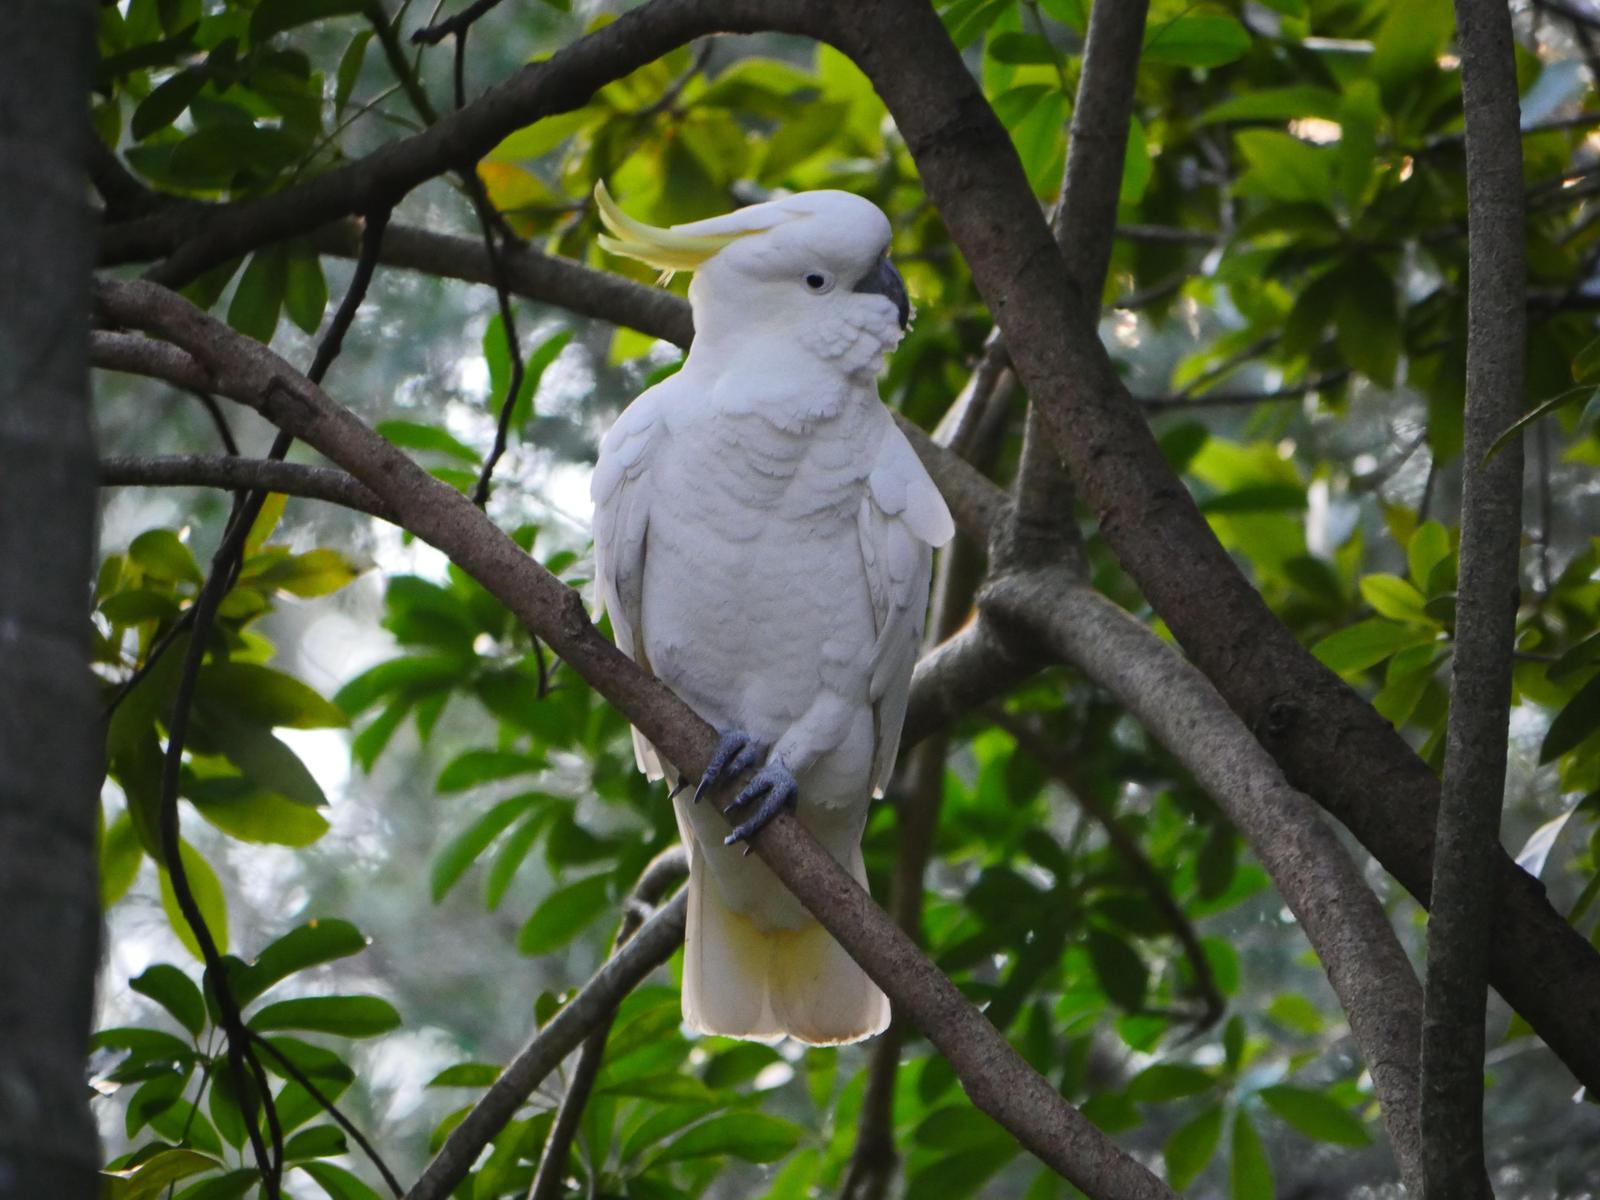 Sulphur-crested Cockatoo Photo by Peter Lowe